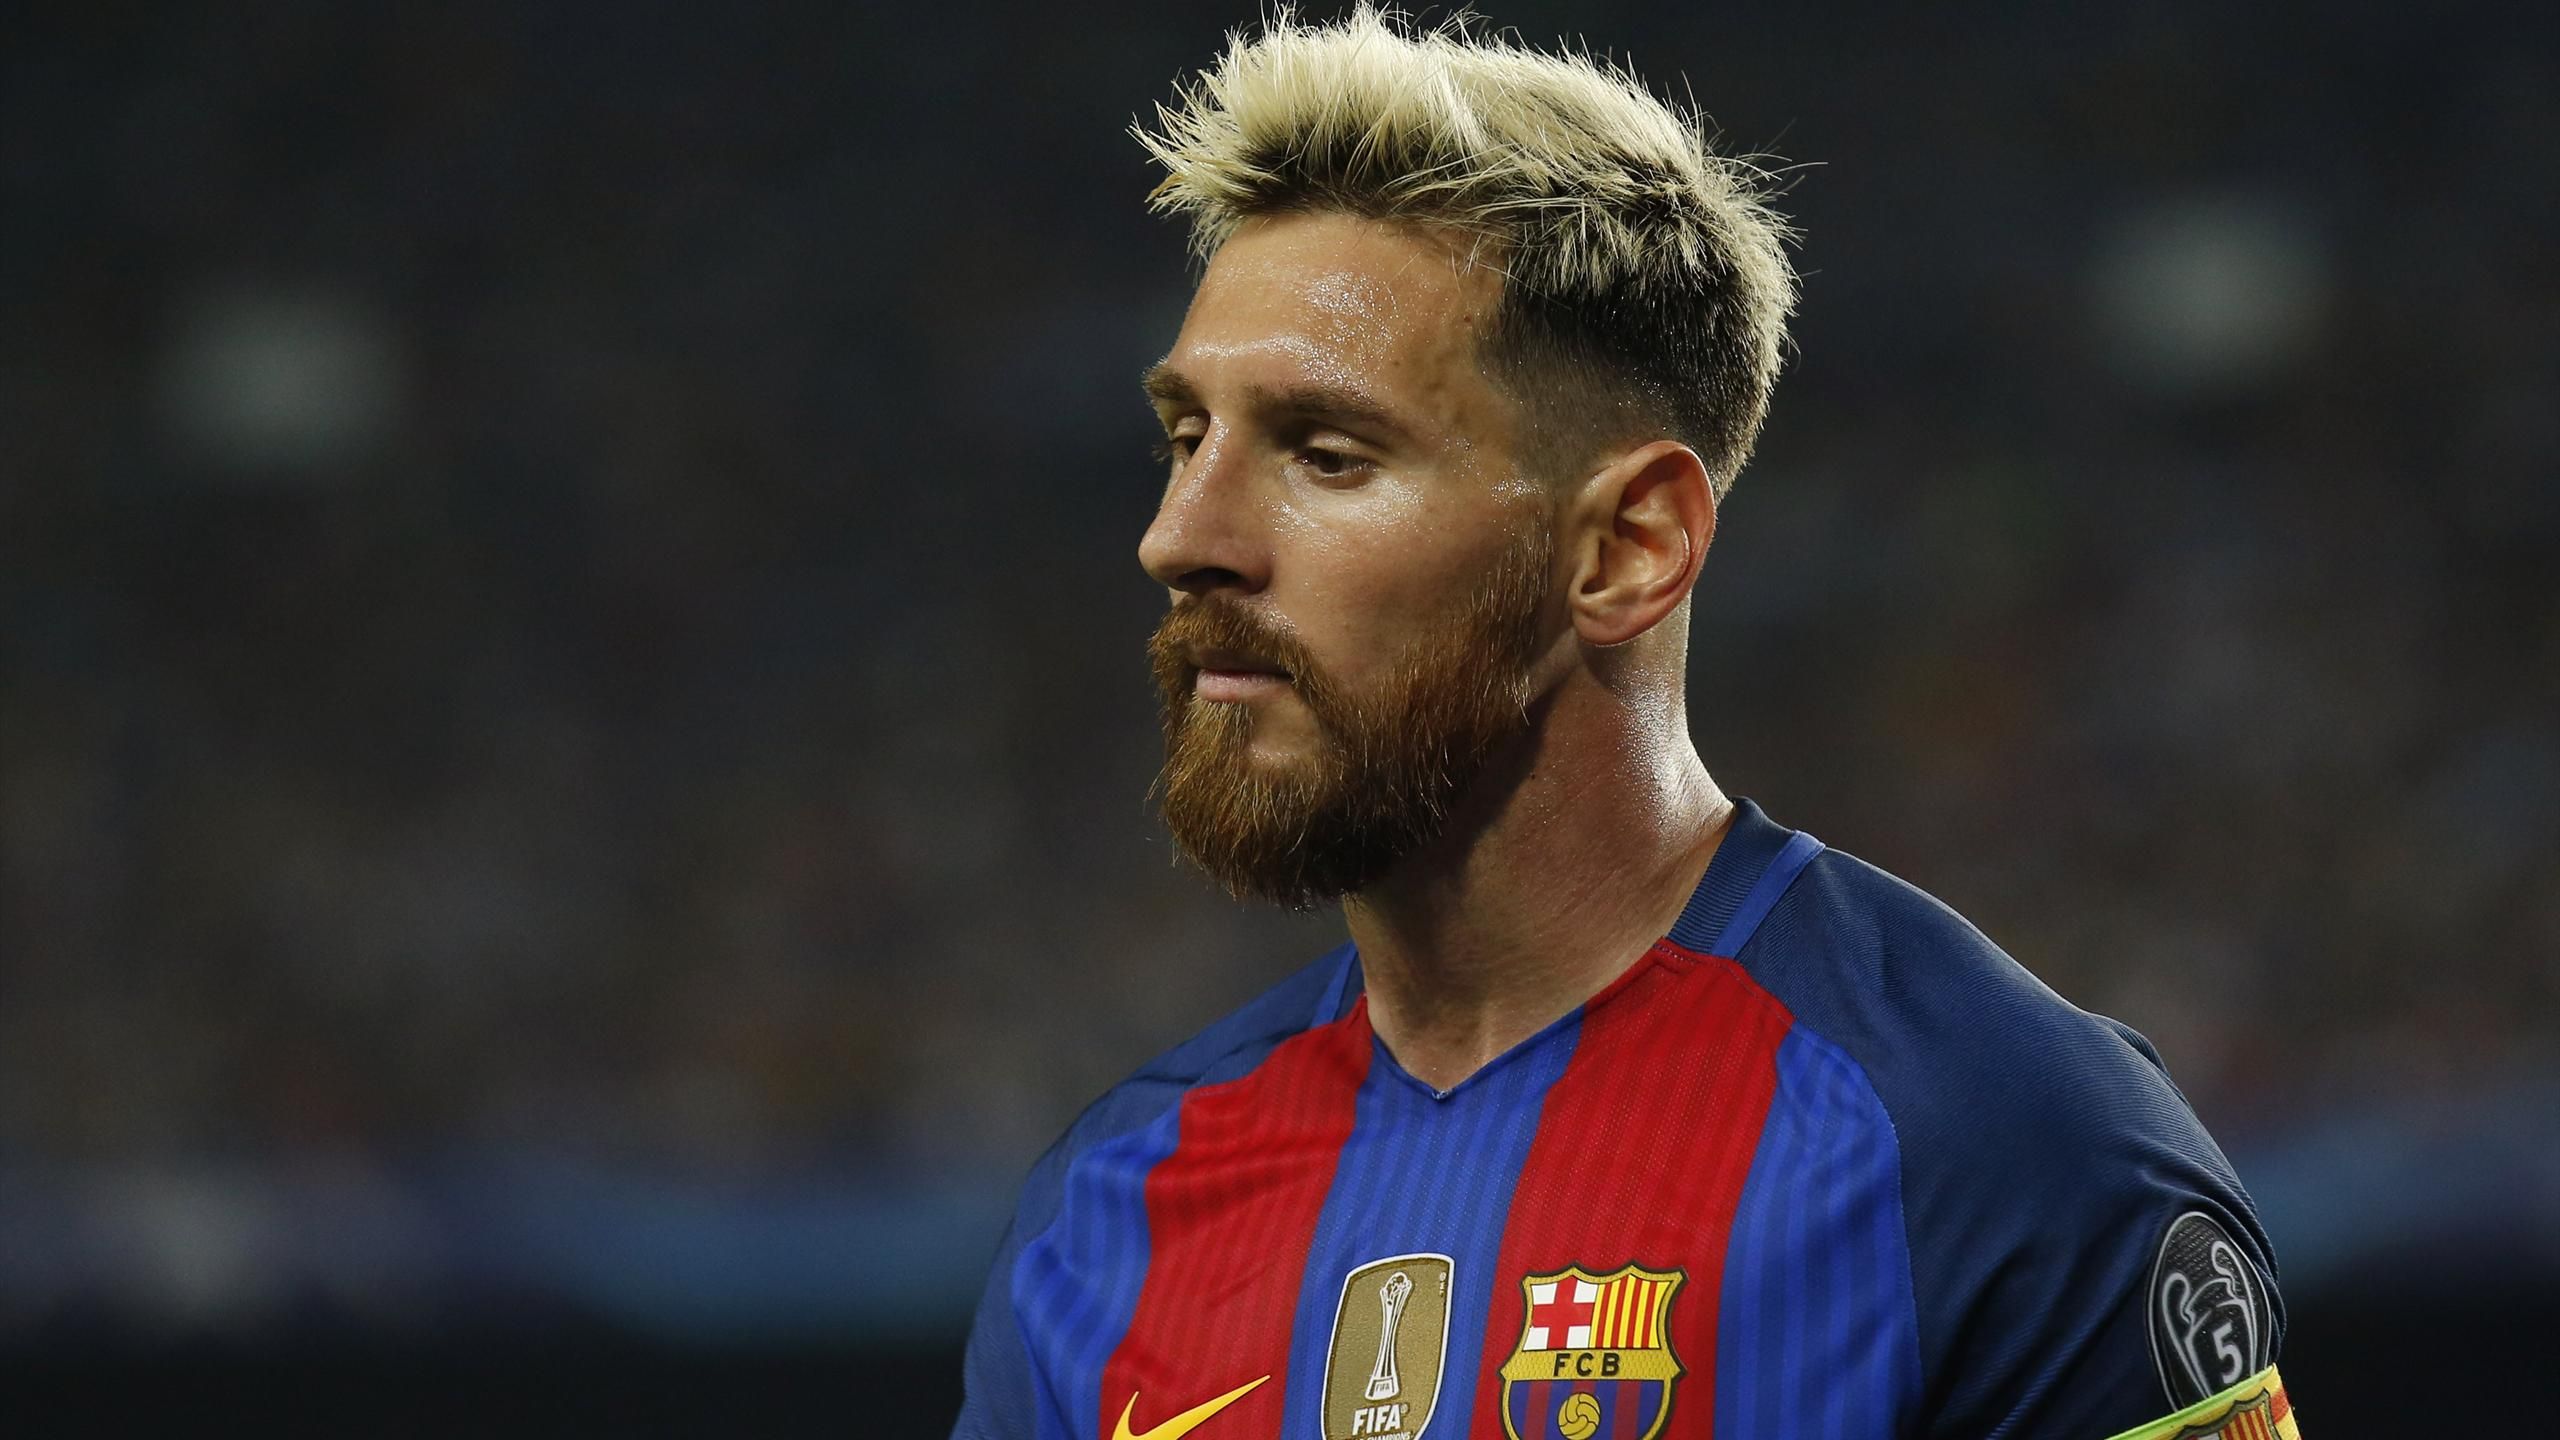 Messi and Neymar tried to convince a third Barca player to dye his hair  blonde